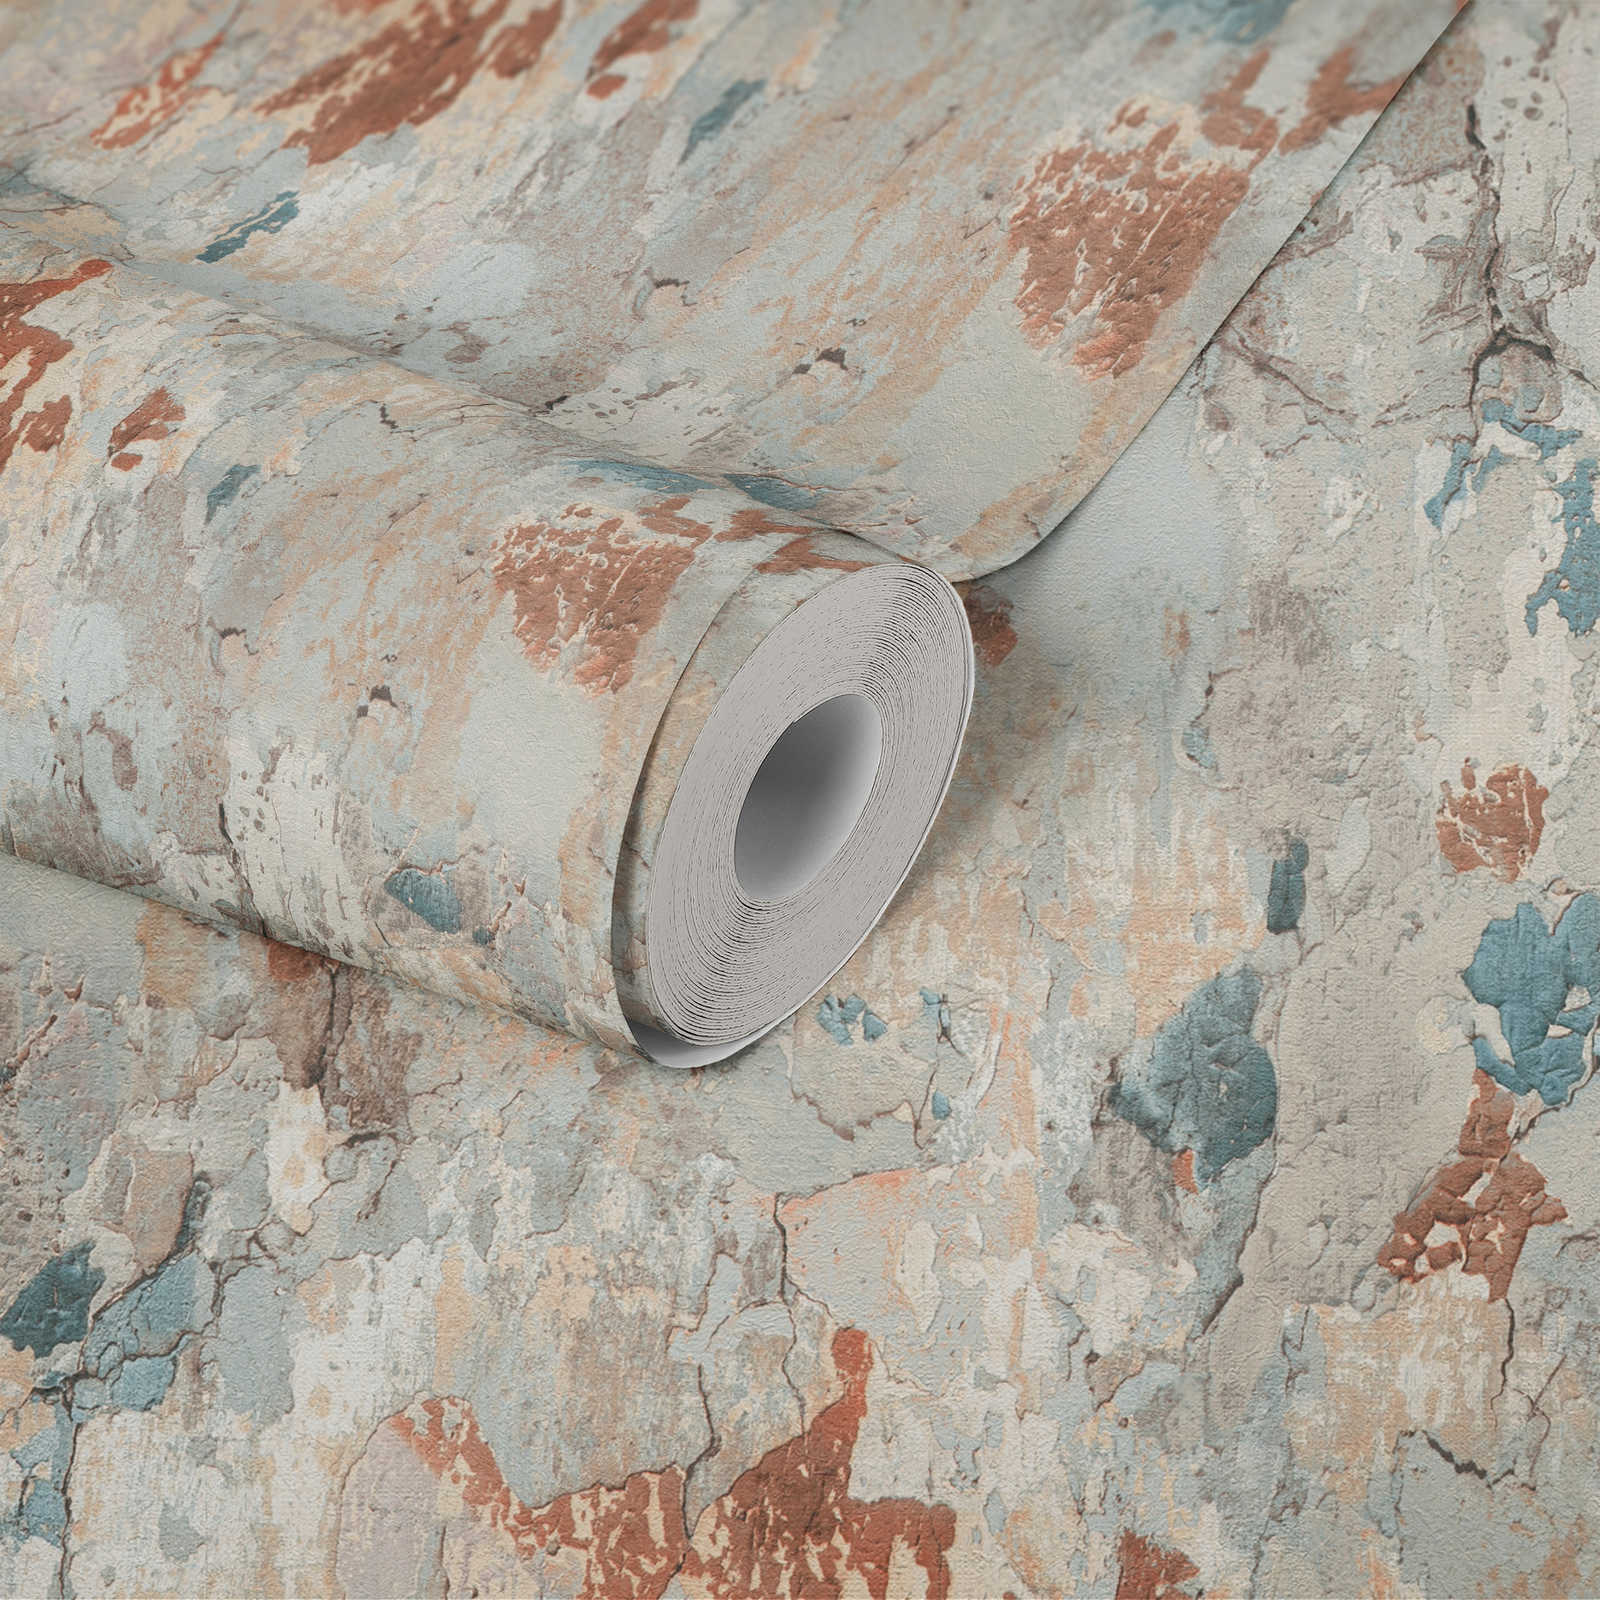             Rustic non-woven wallpaper with plaster look in used look - brown, grey, green
        